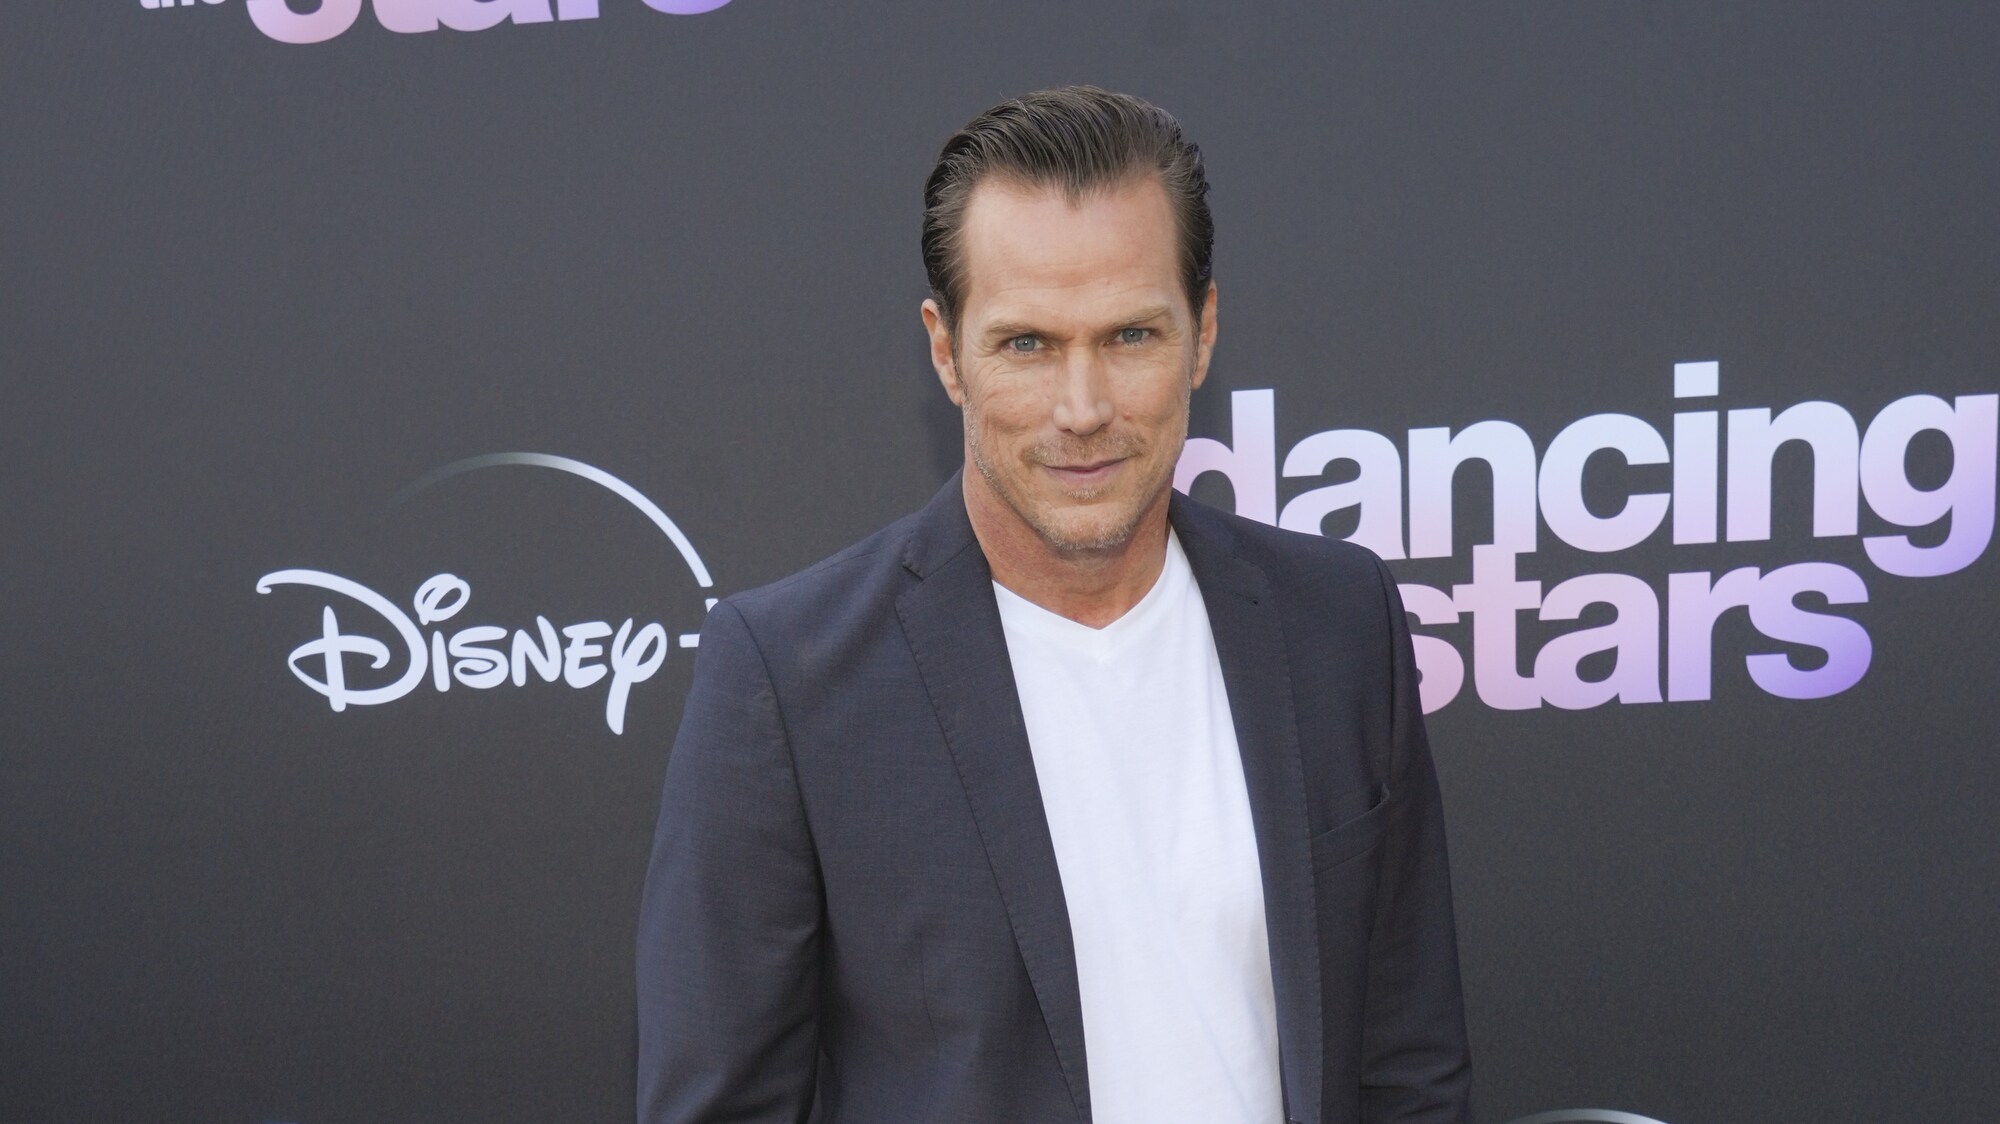 DANCING WITH THE STARS - "Episode TBD" (ABC/Ben Hider) JASON LEWIS